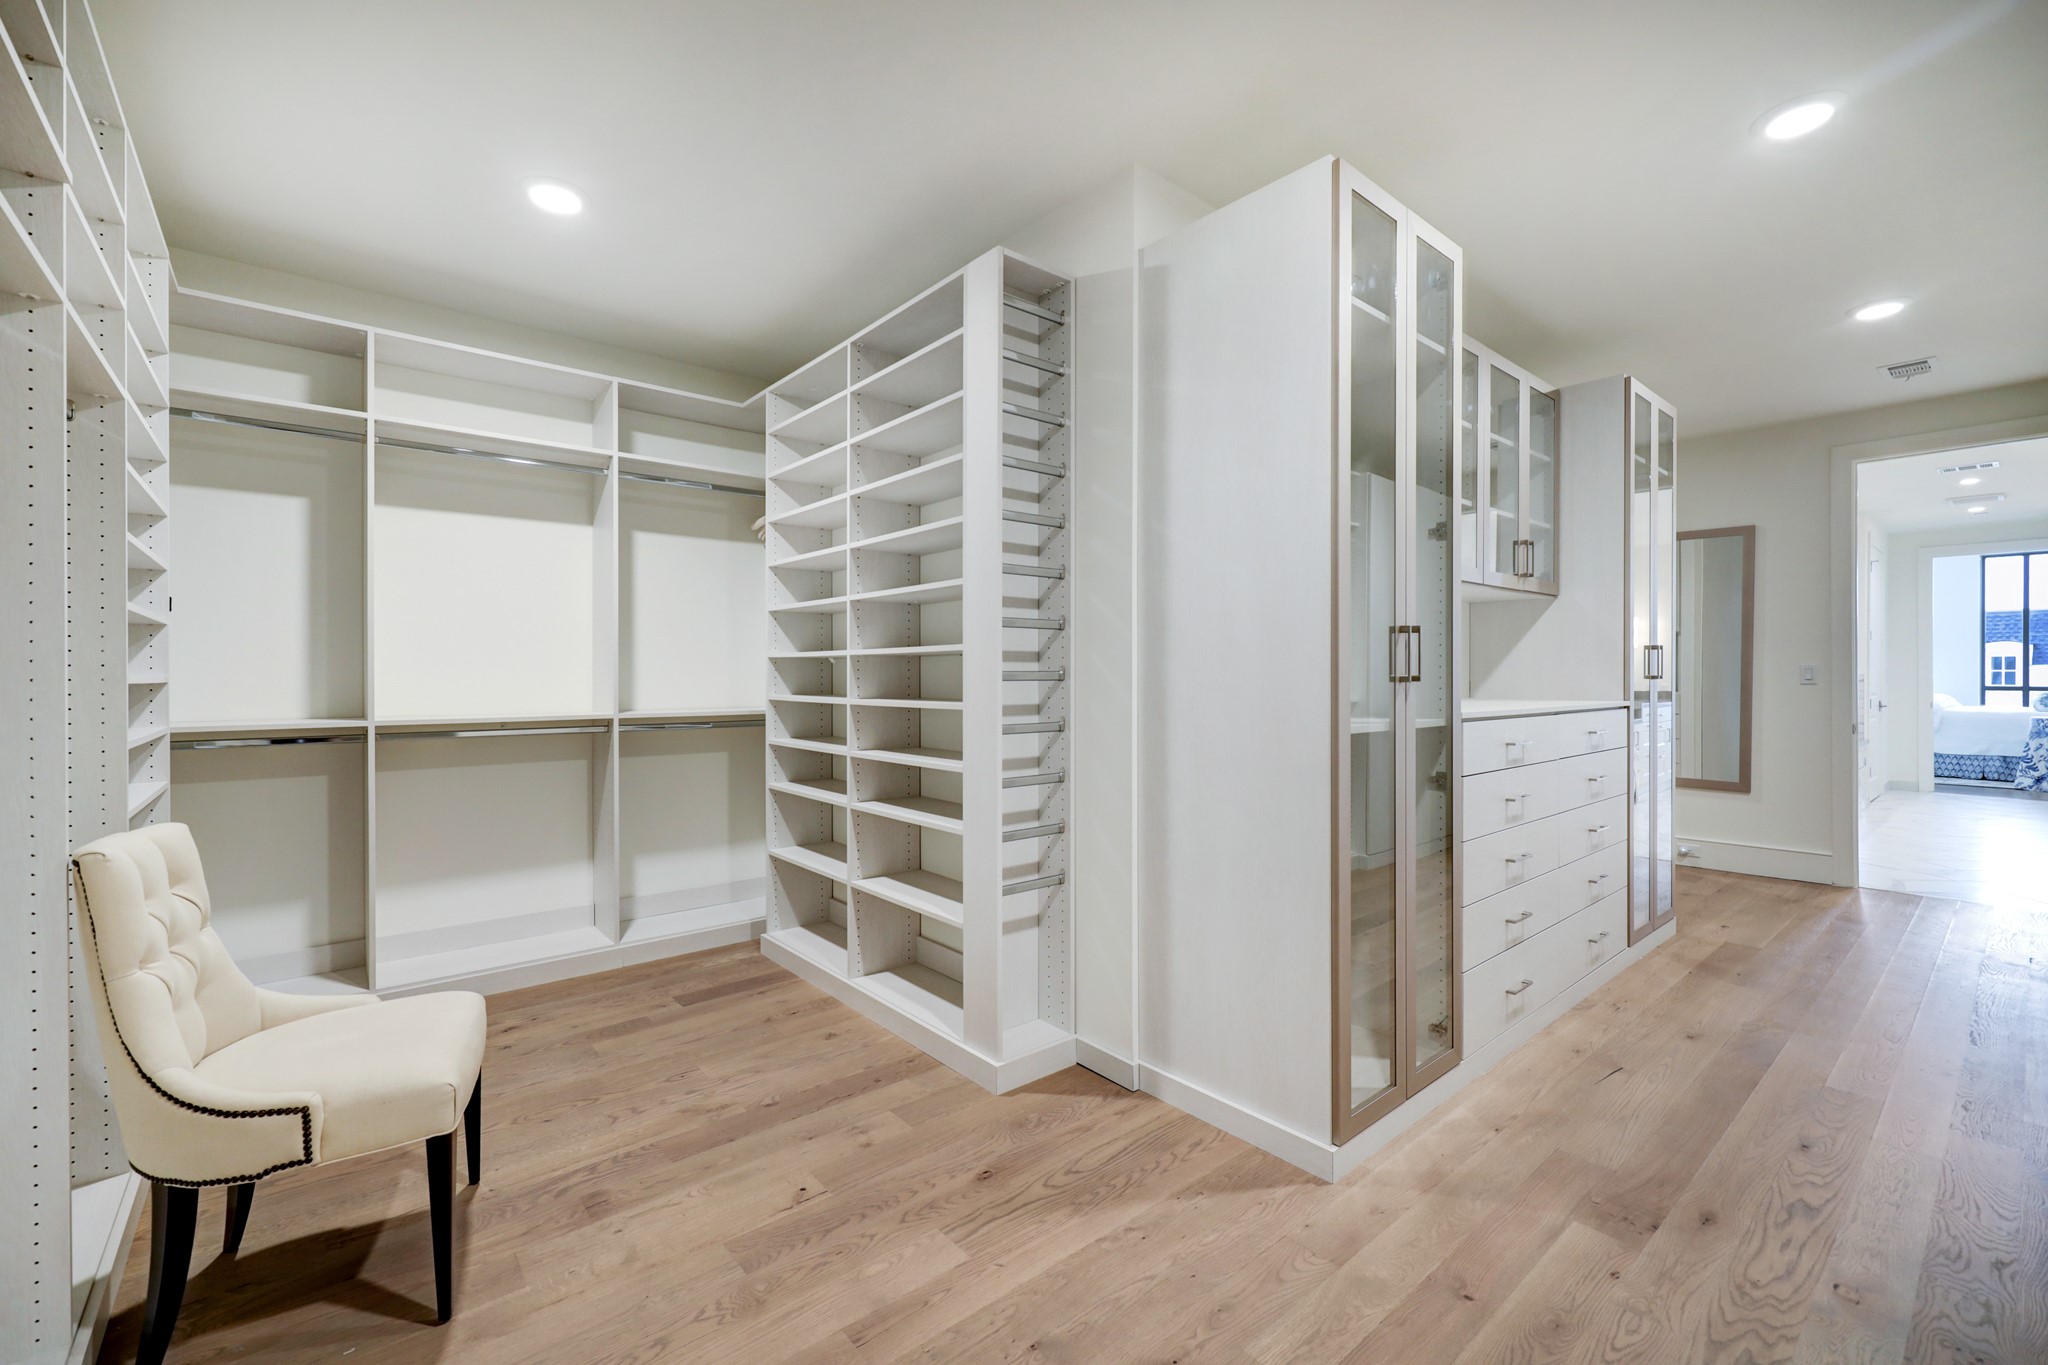 Another view of the PRIMARY CLOSET, this one showing the various sizes of the shelving provided, a packing station with drawers underneath and impressive glass front hanging closets.